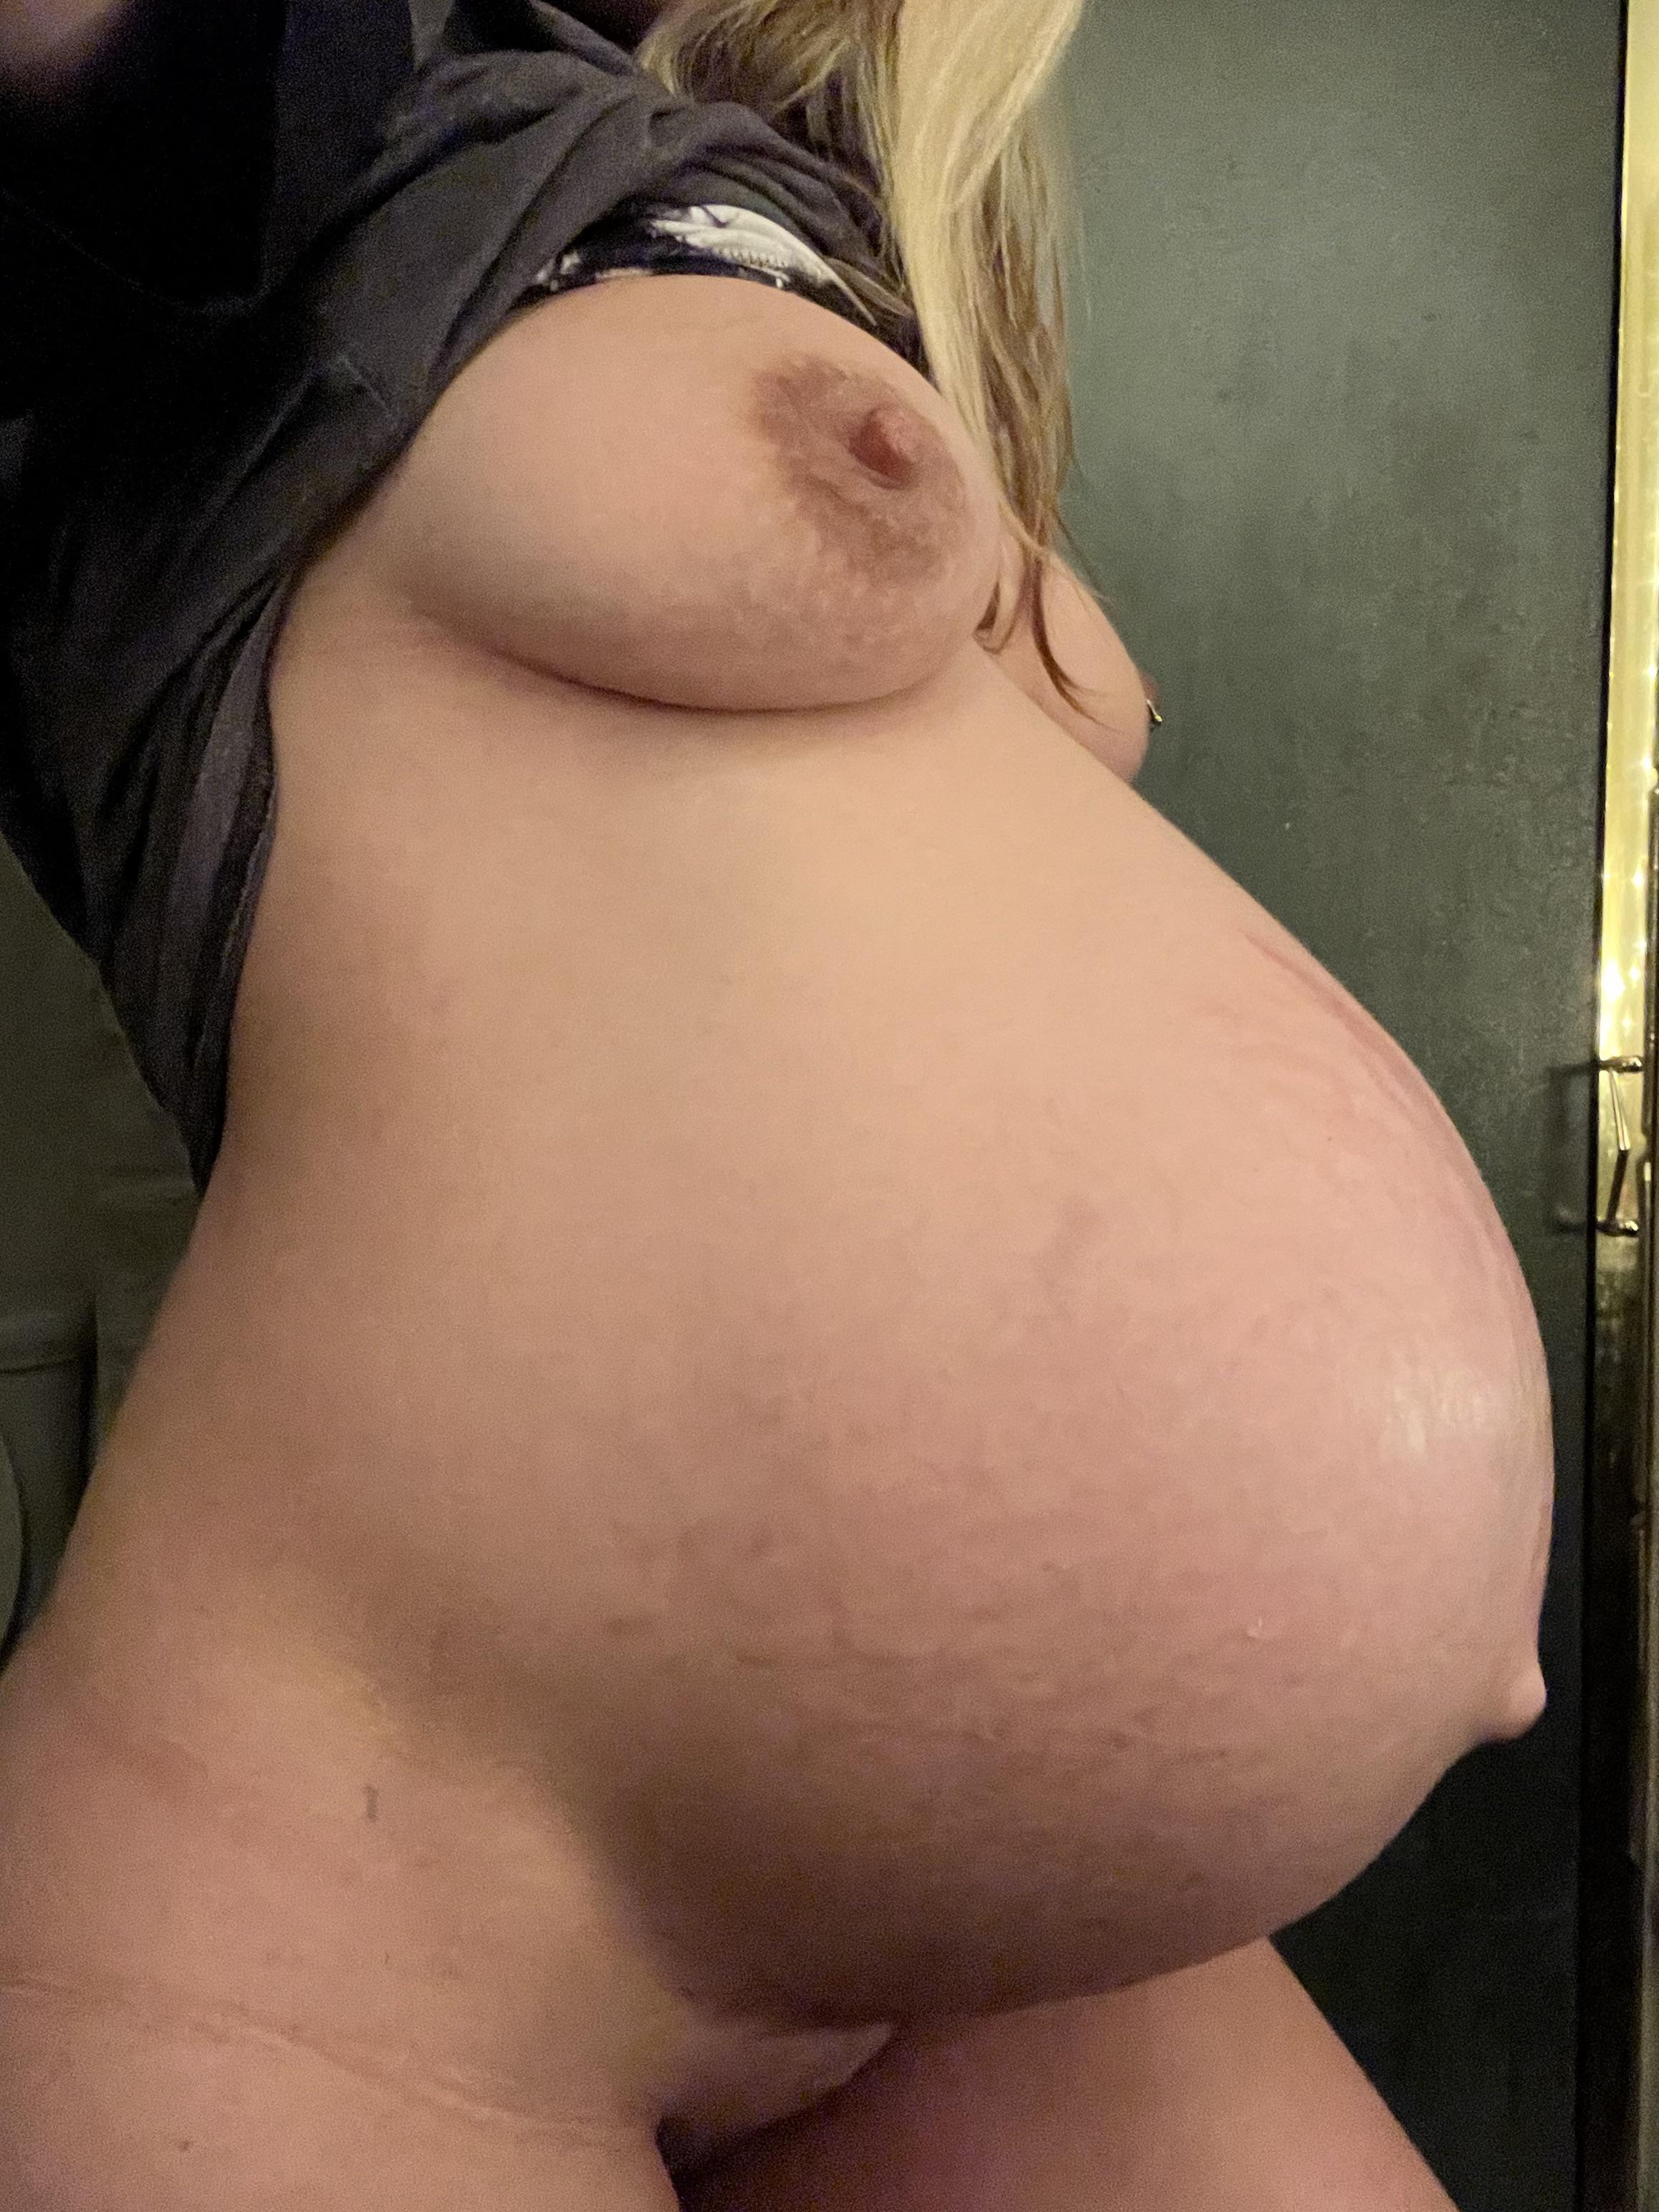 40 weeks pregnant today, anyone want to volunteer to try to fuck me into labor?